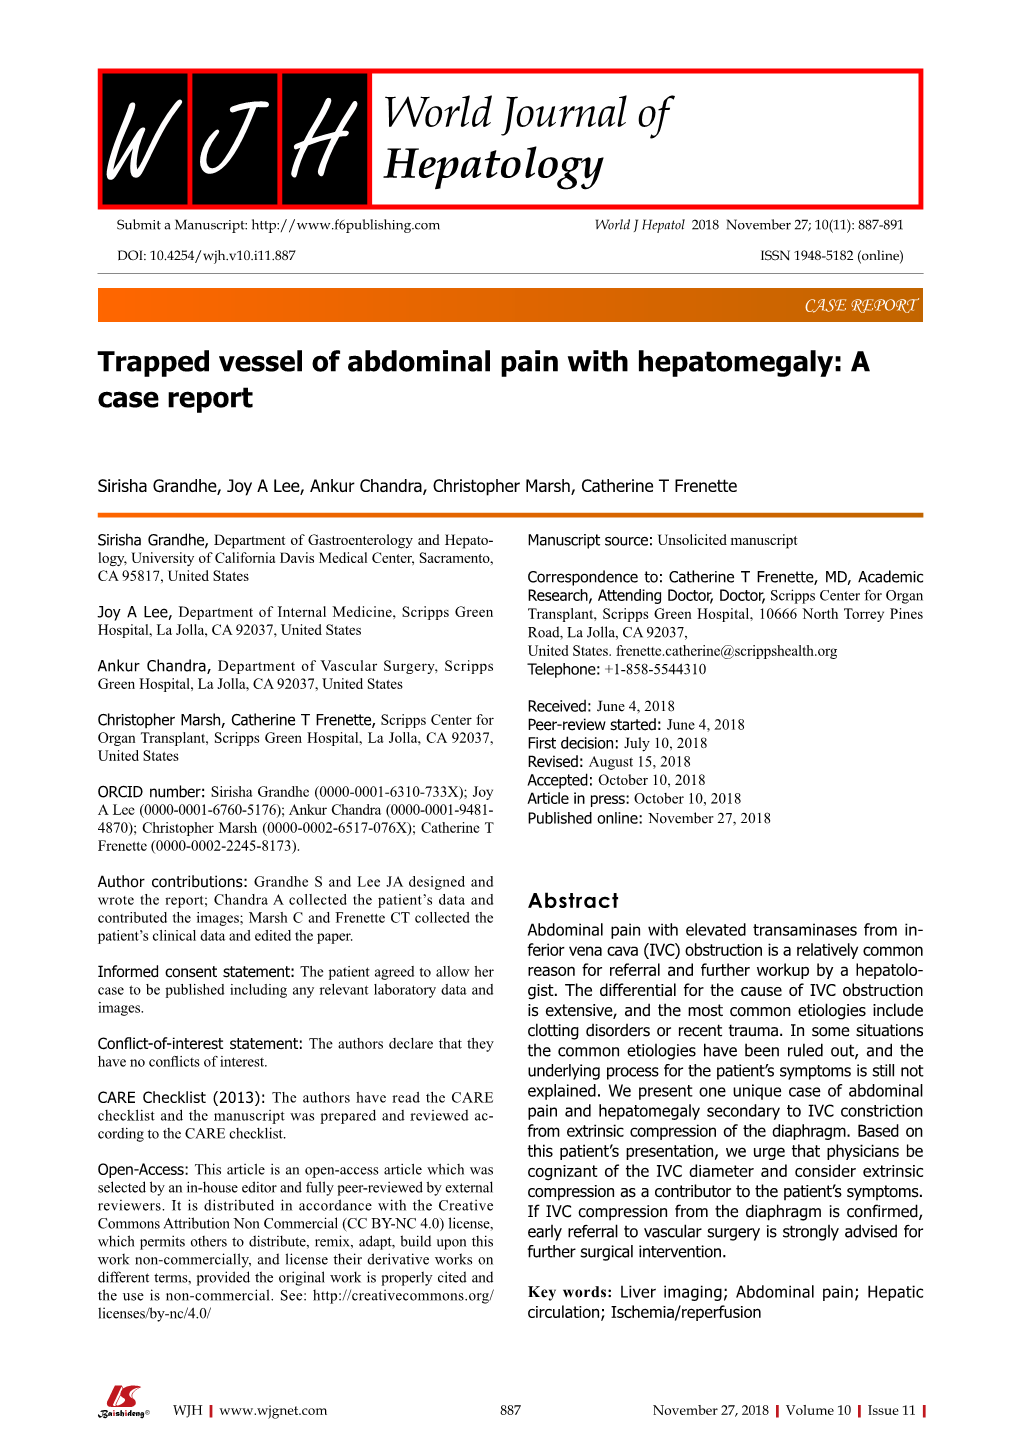 Trapped Vessel of Abdominal Pain with Hepatomegaly: a Case Report